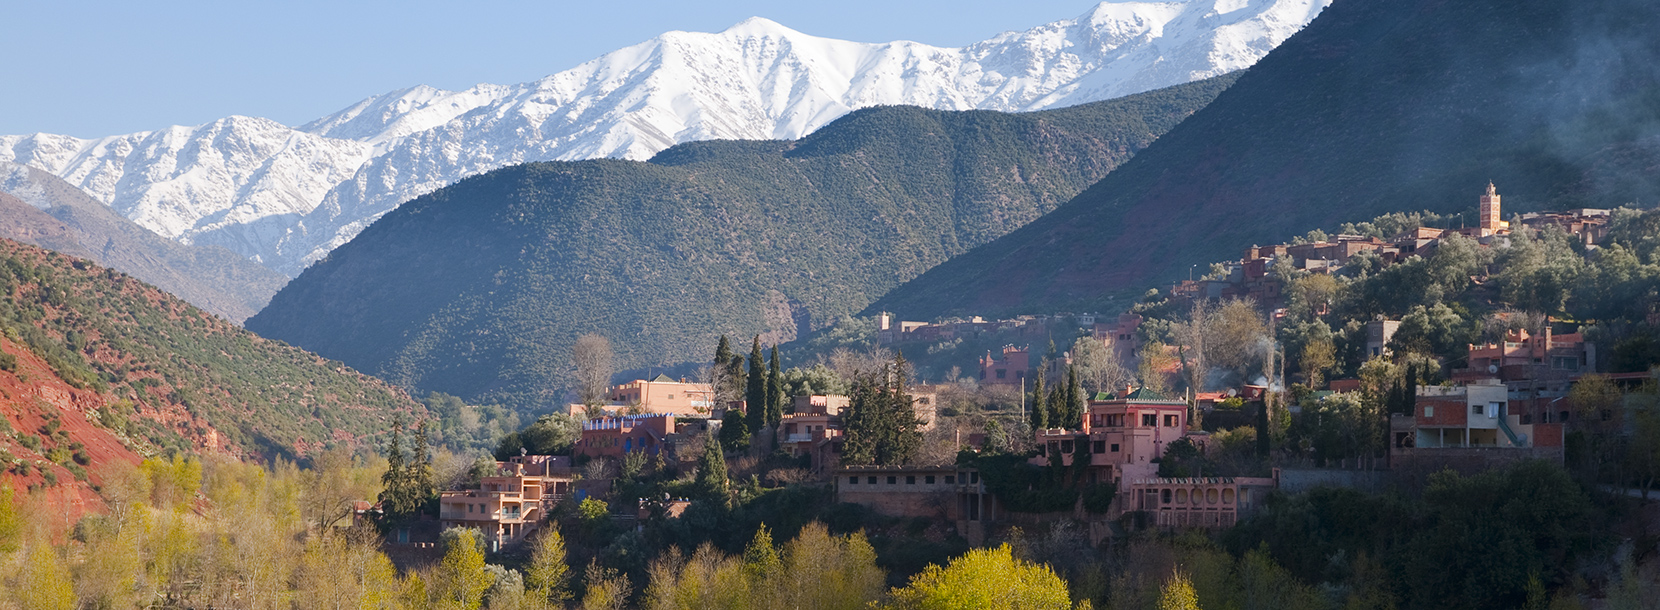 Marrakesh from the mountaintops